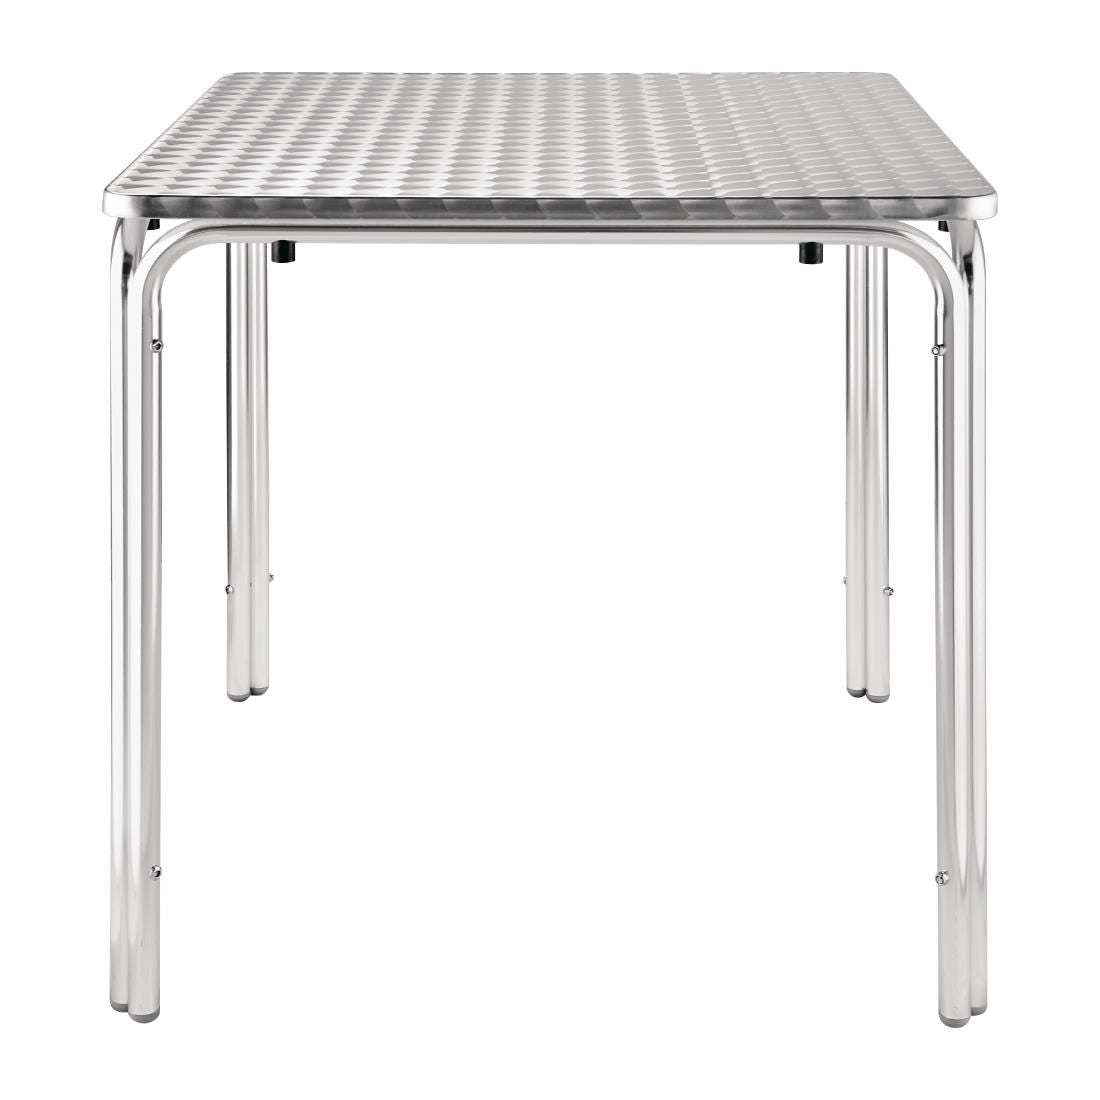 Bolero Square Stacking Table Stainless Steel 700mm JD Catering Equipment Solutions Ltd